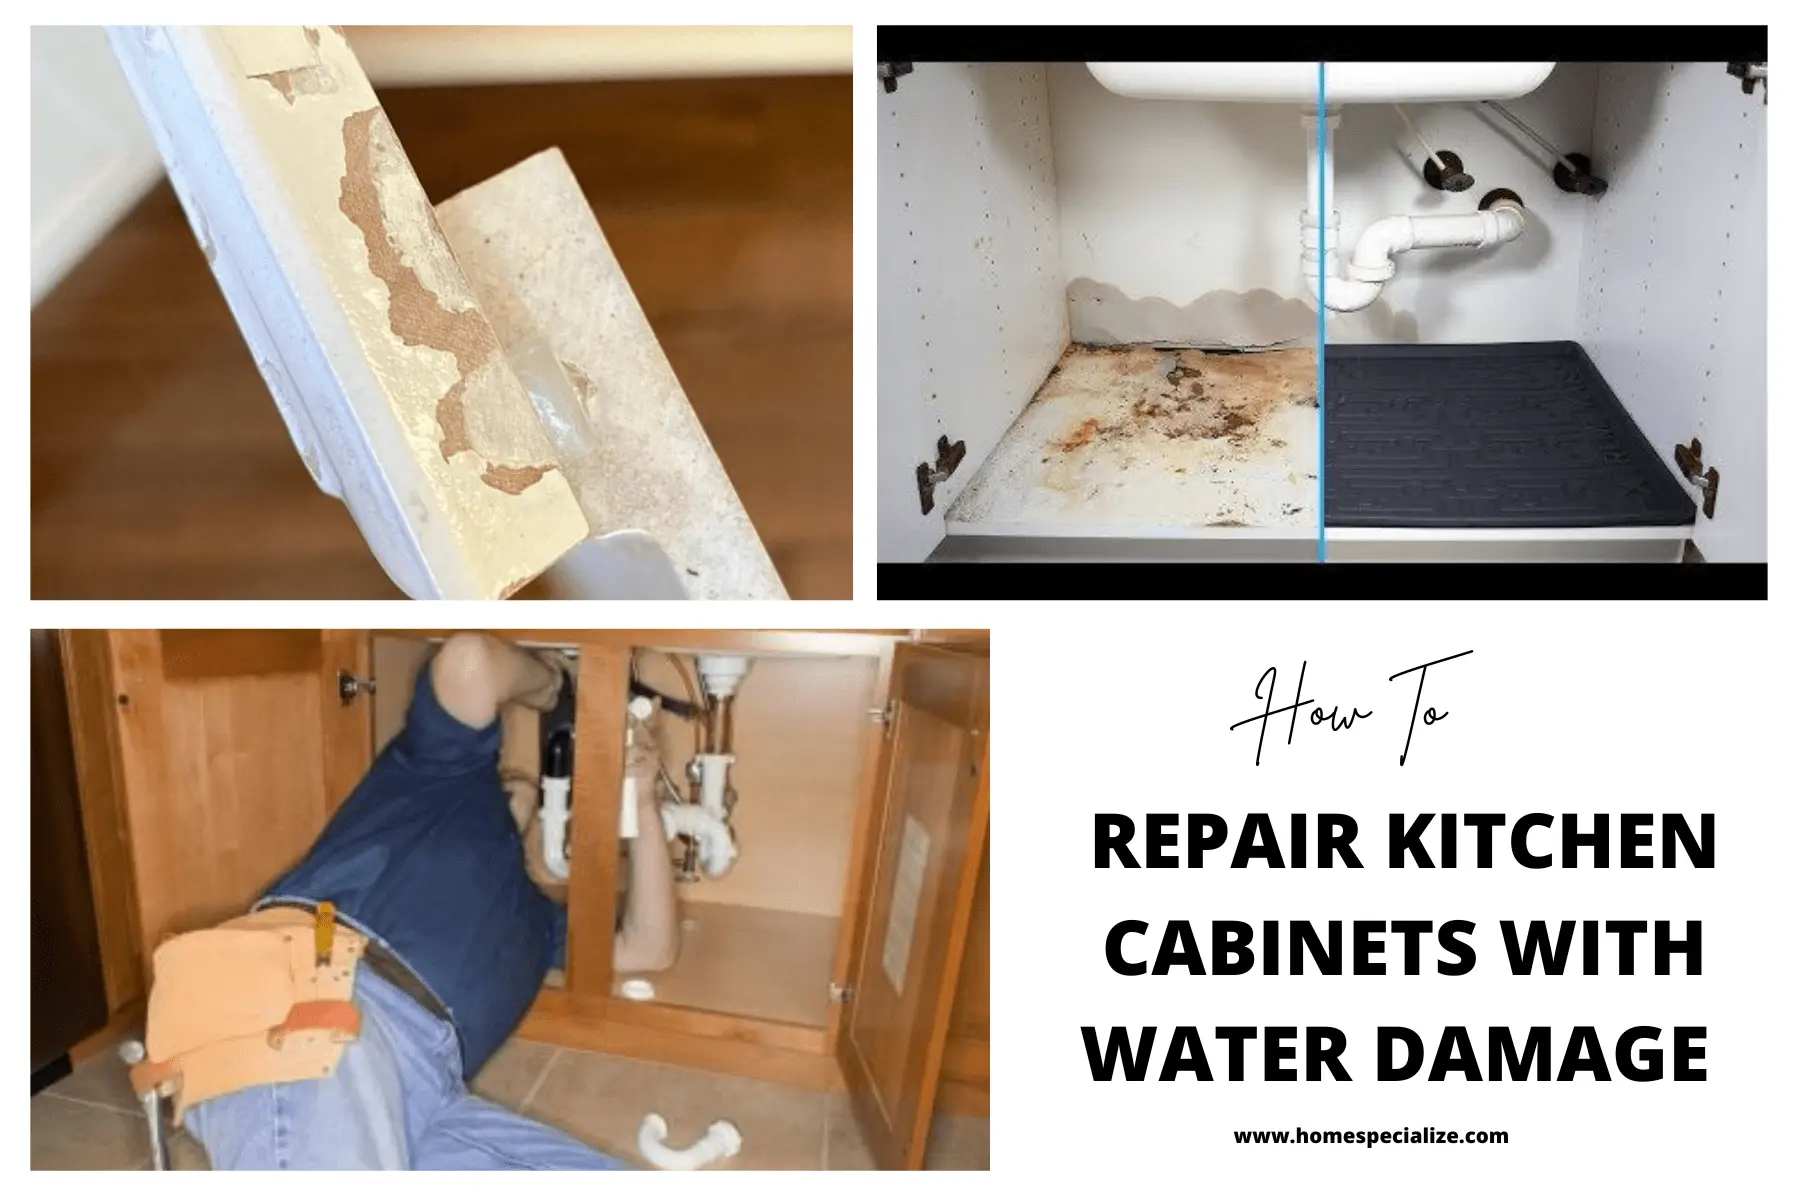 How to repair kitchen cabinets with water damage